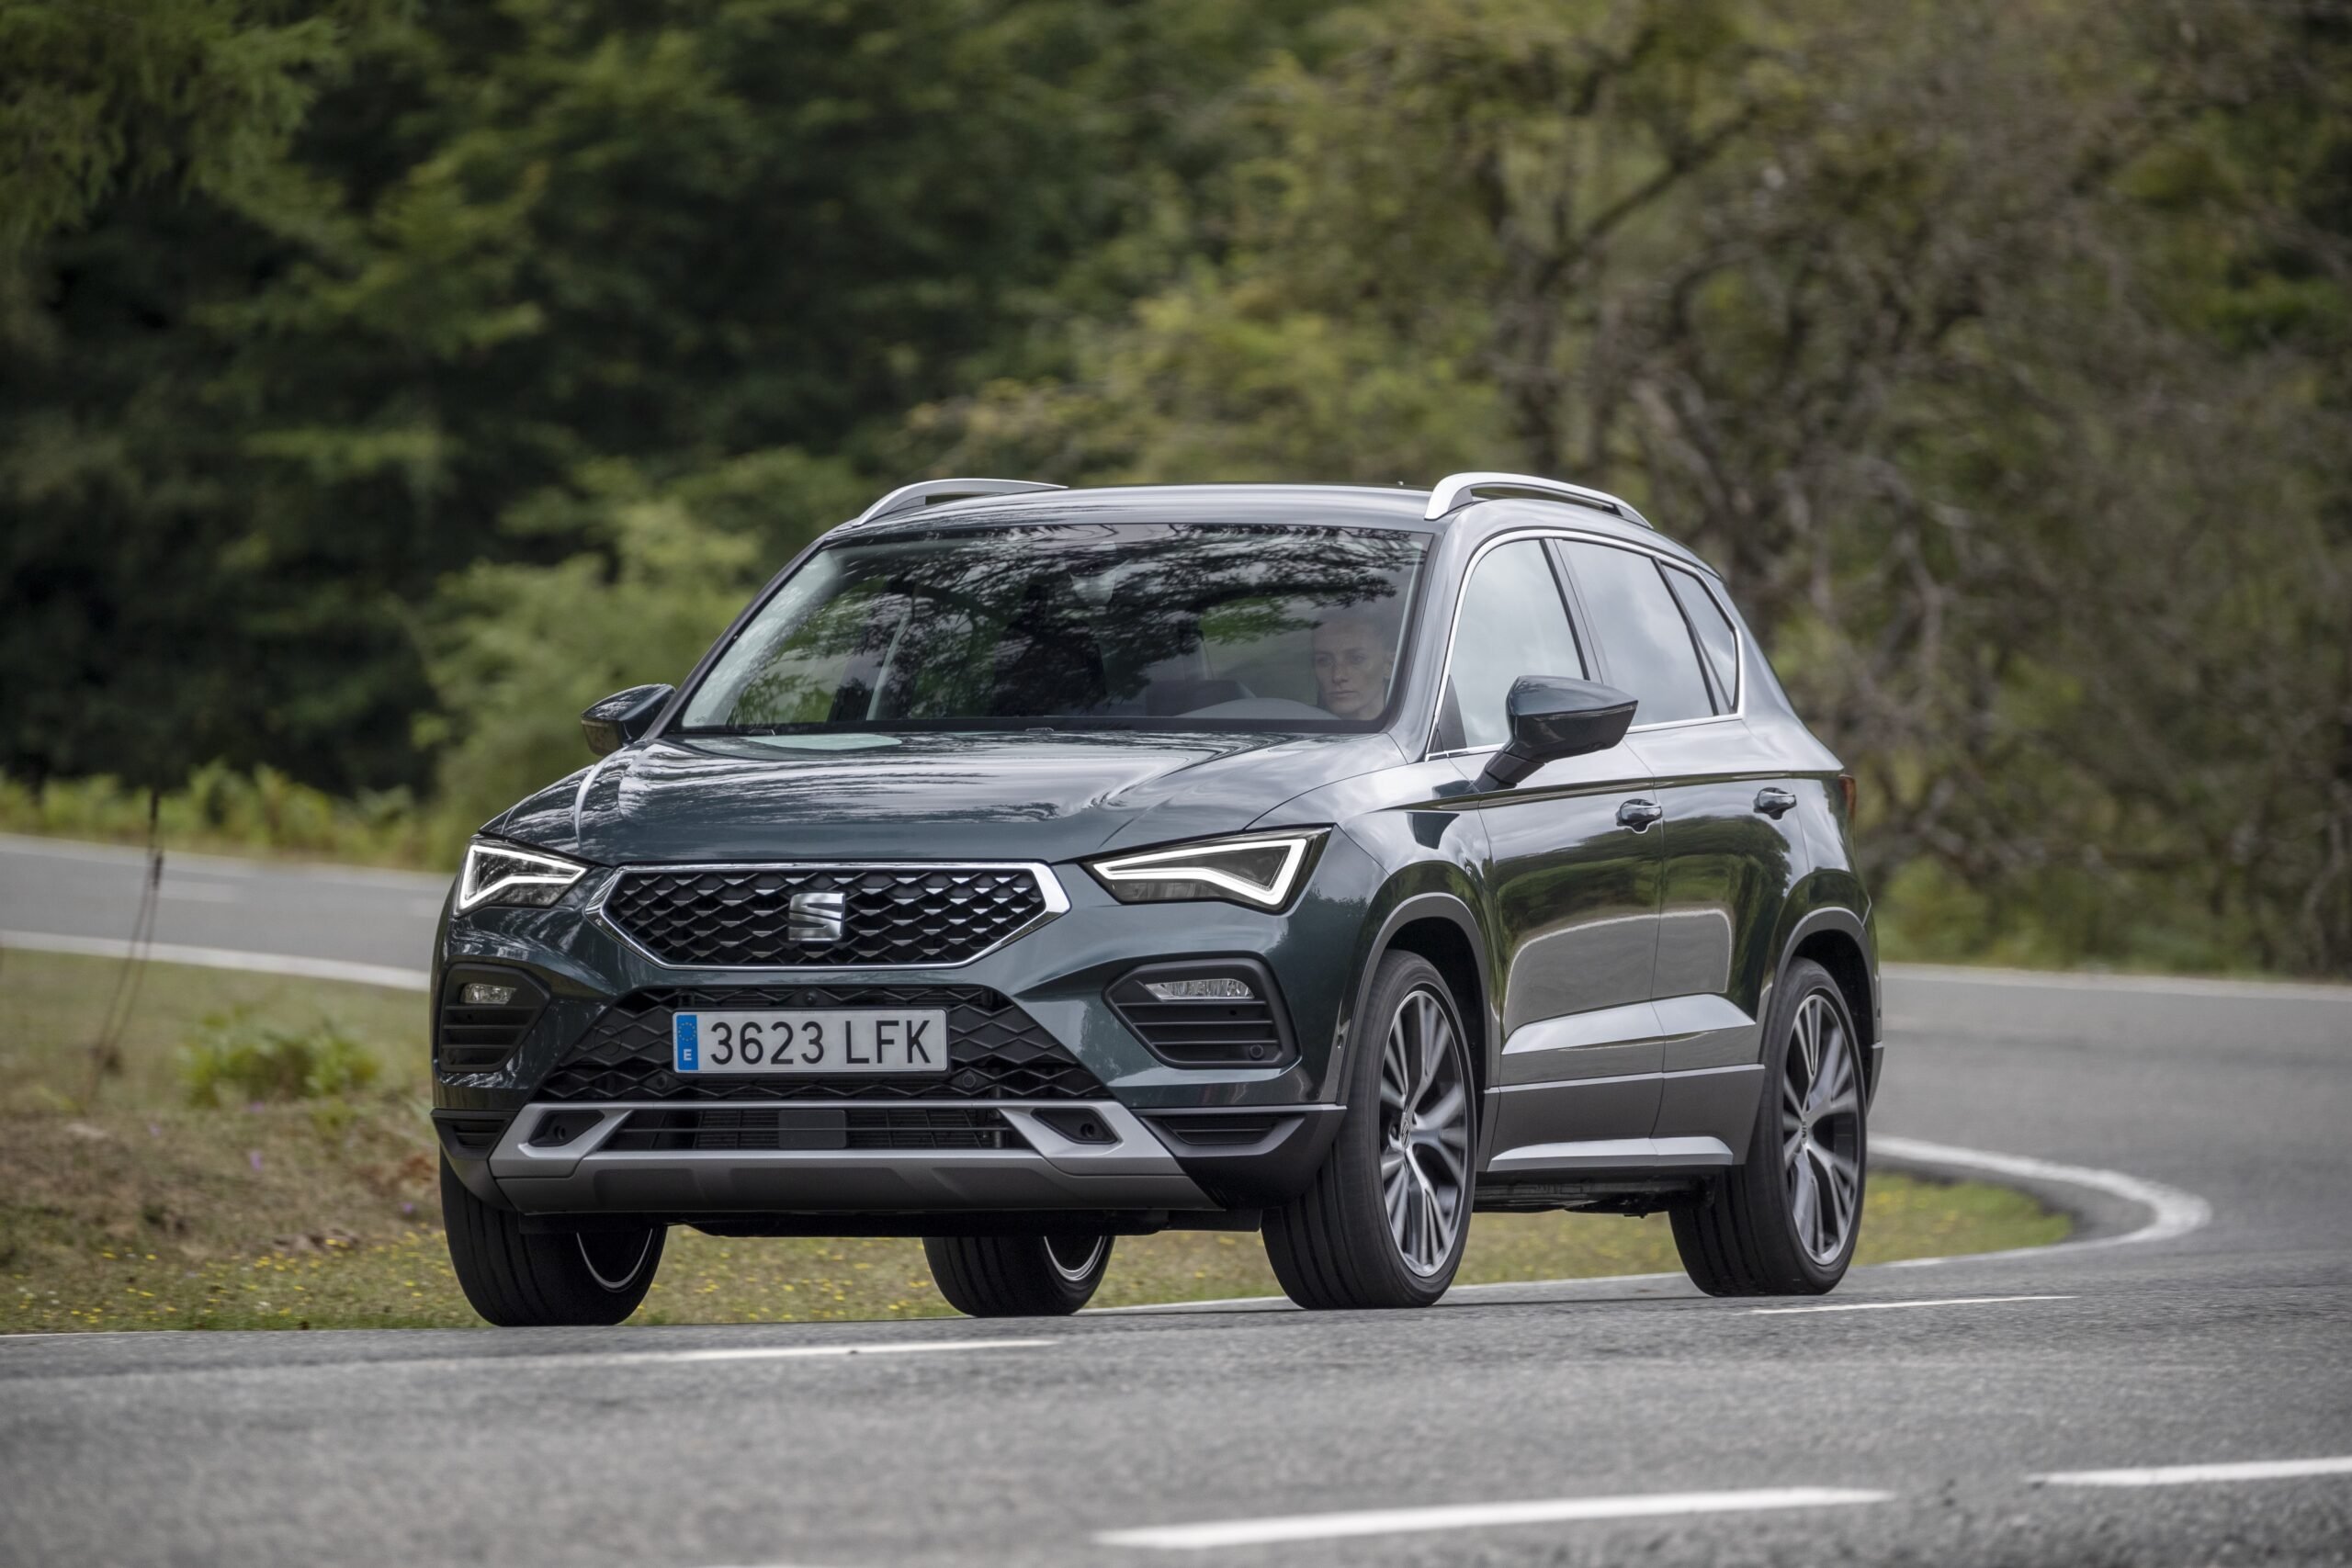 Refreshed Ateca for all your family car needs - Medical Independent